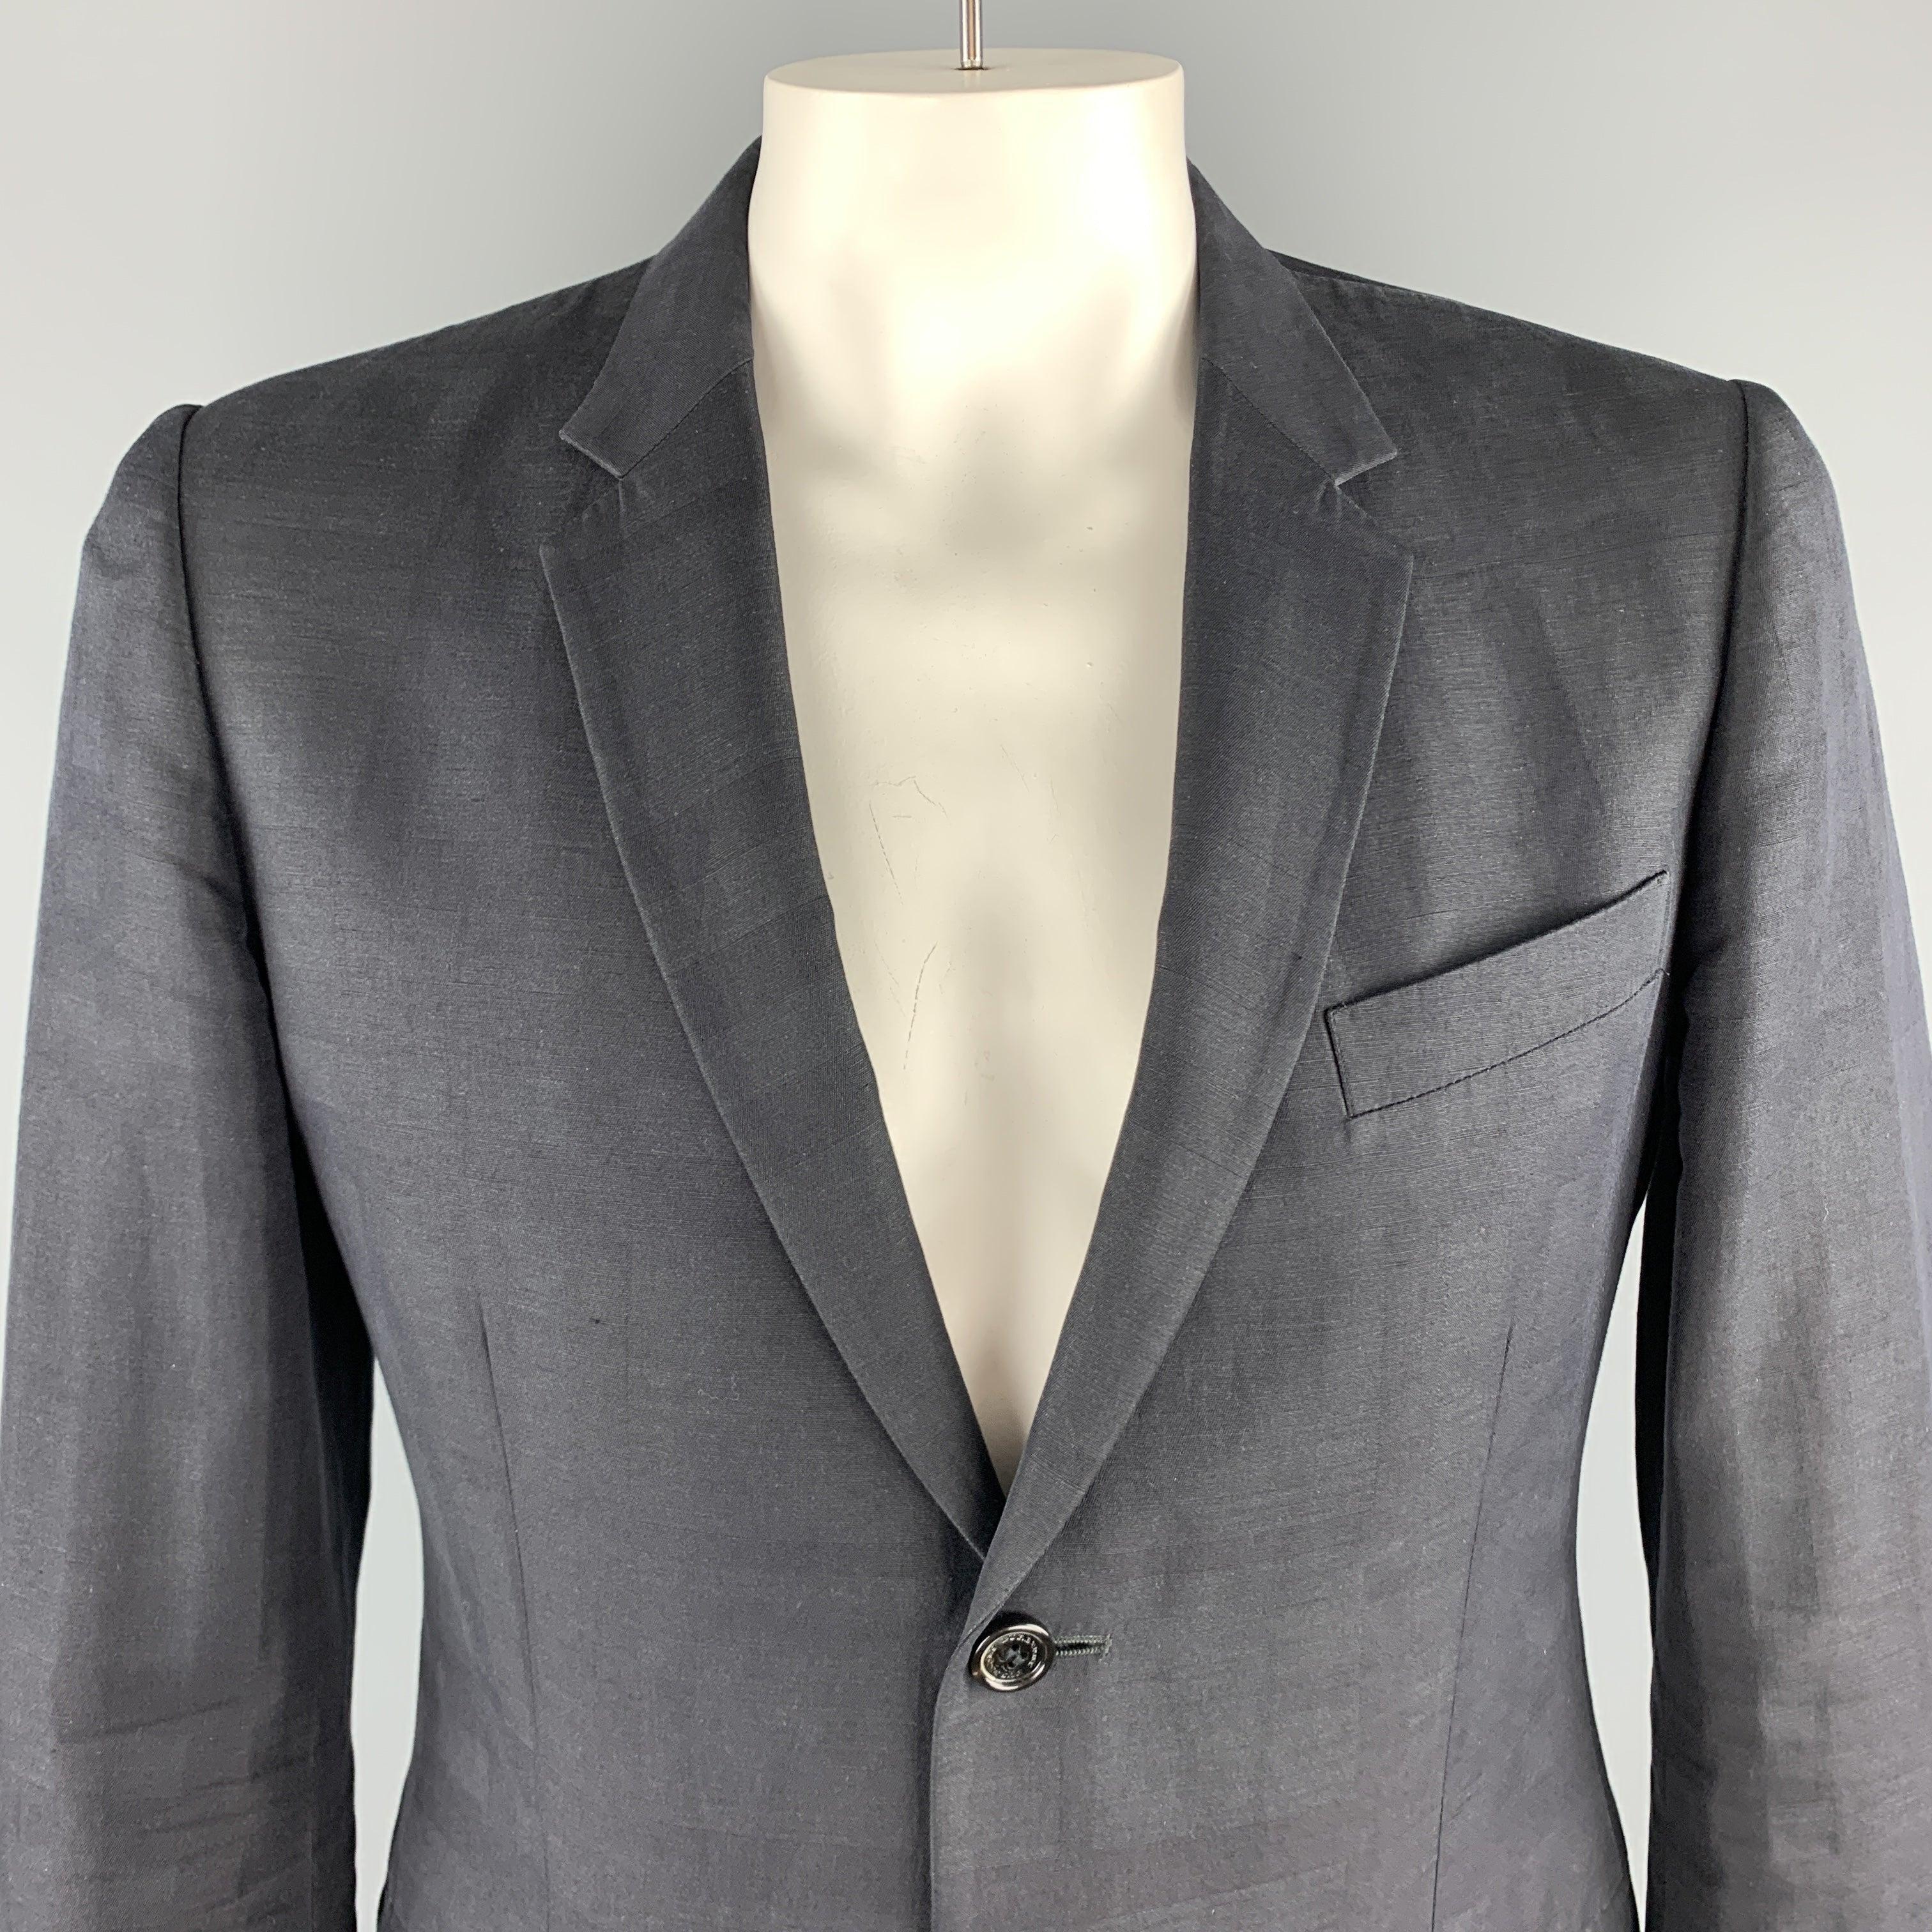 BURBERRY LONDON
sport coat comes in black on black plaid cotton, linen, and
 wool blend woven material with a notch lapel, single breasted, two button front, and double vented back. Made in Portugal.Very Good Pre-Owned Condition.
 

Marked:   IT 5